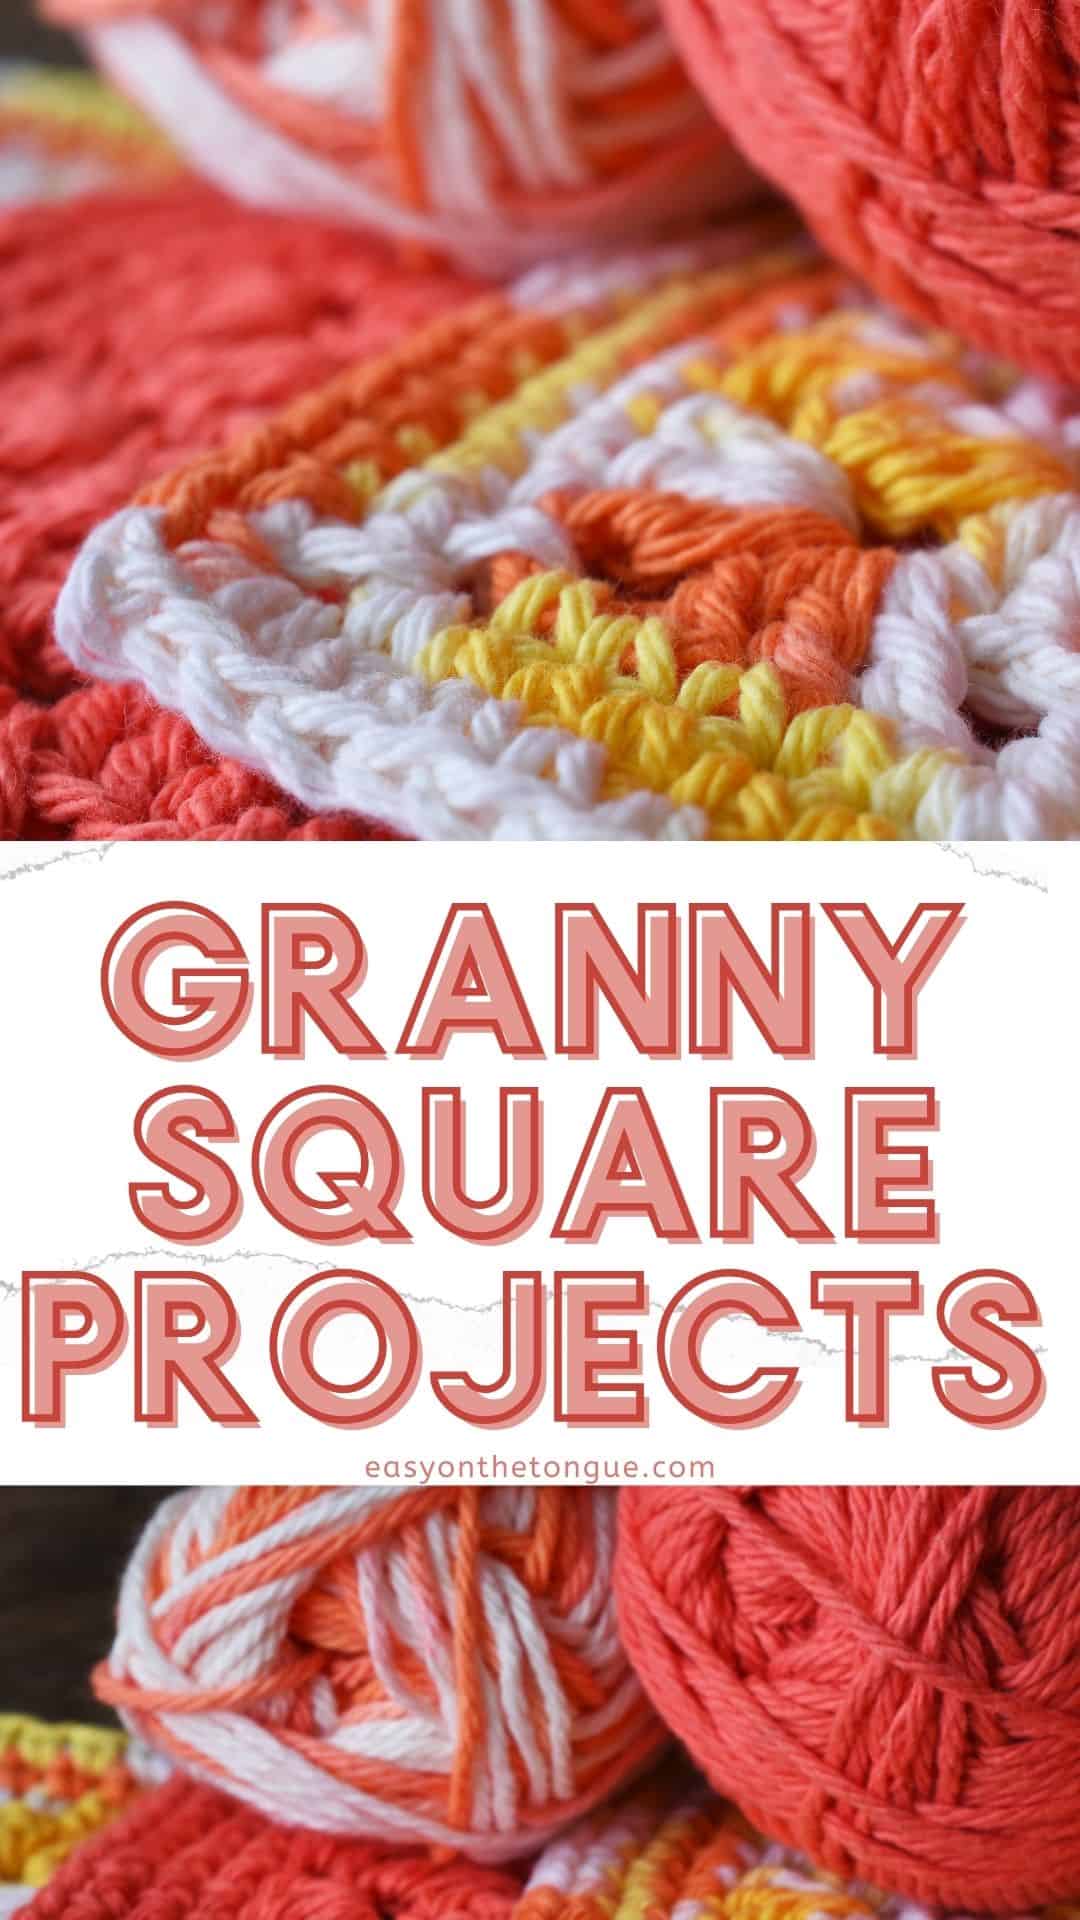 25 Granny Square Projects you can make today!